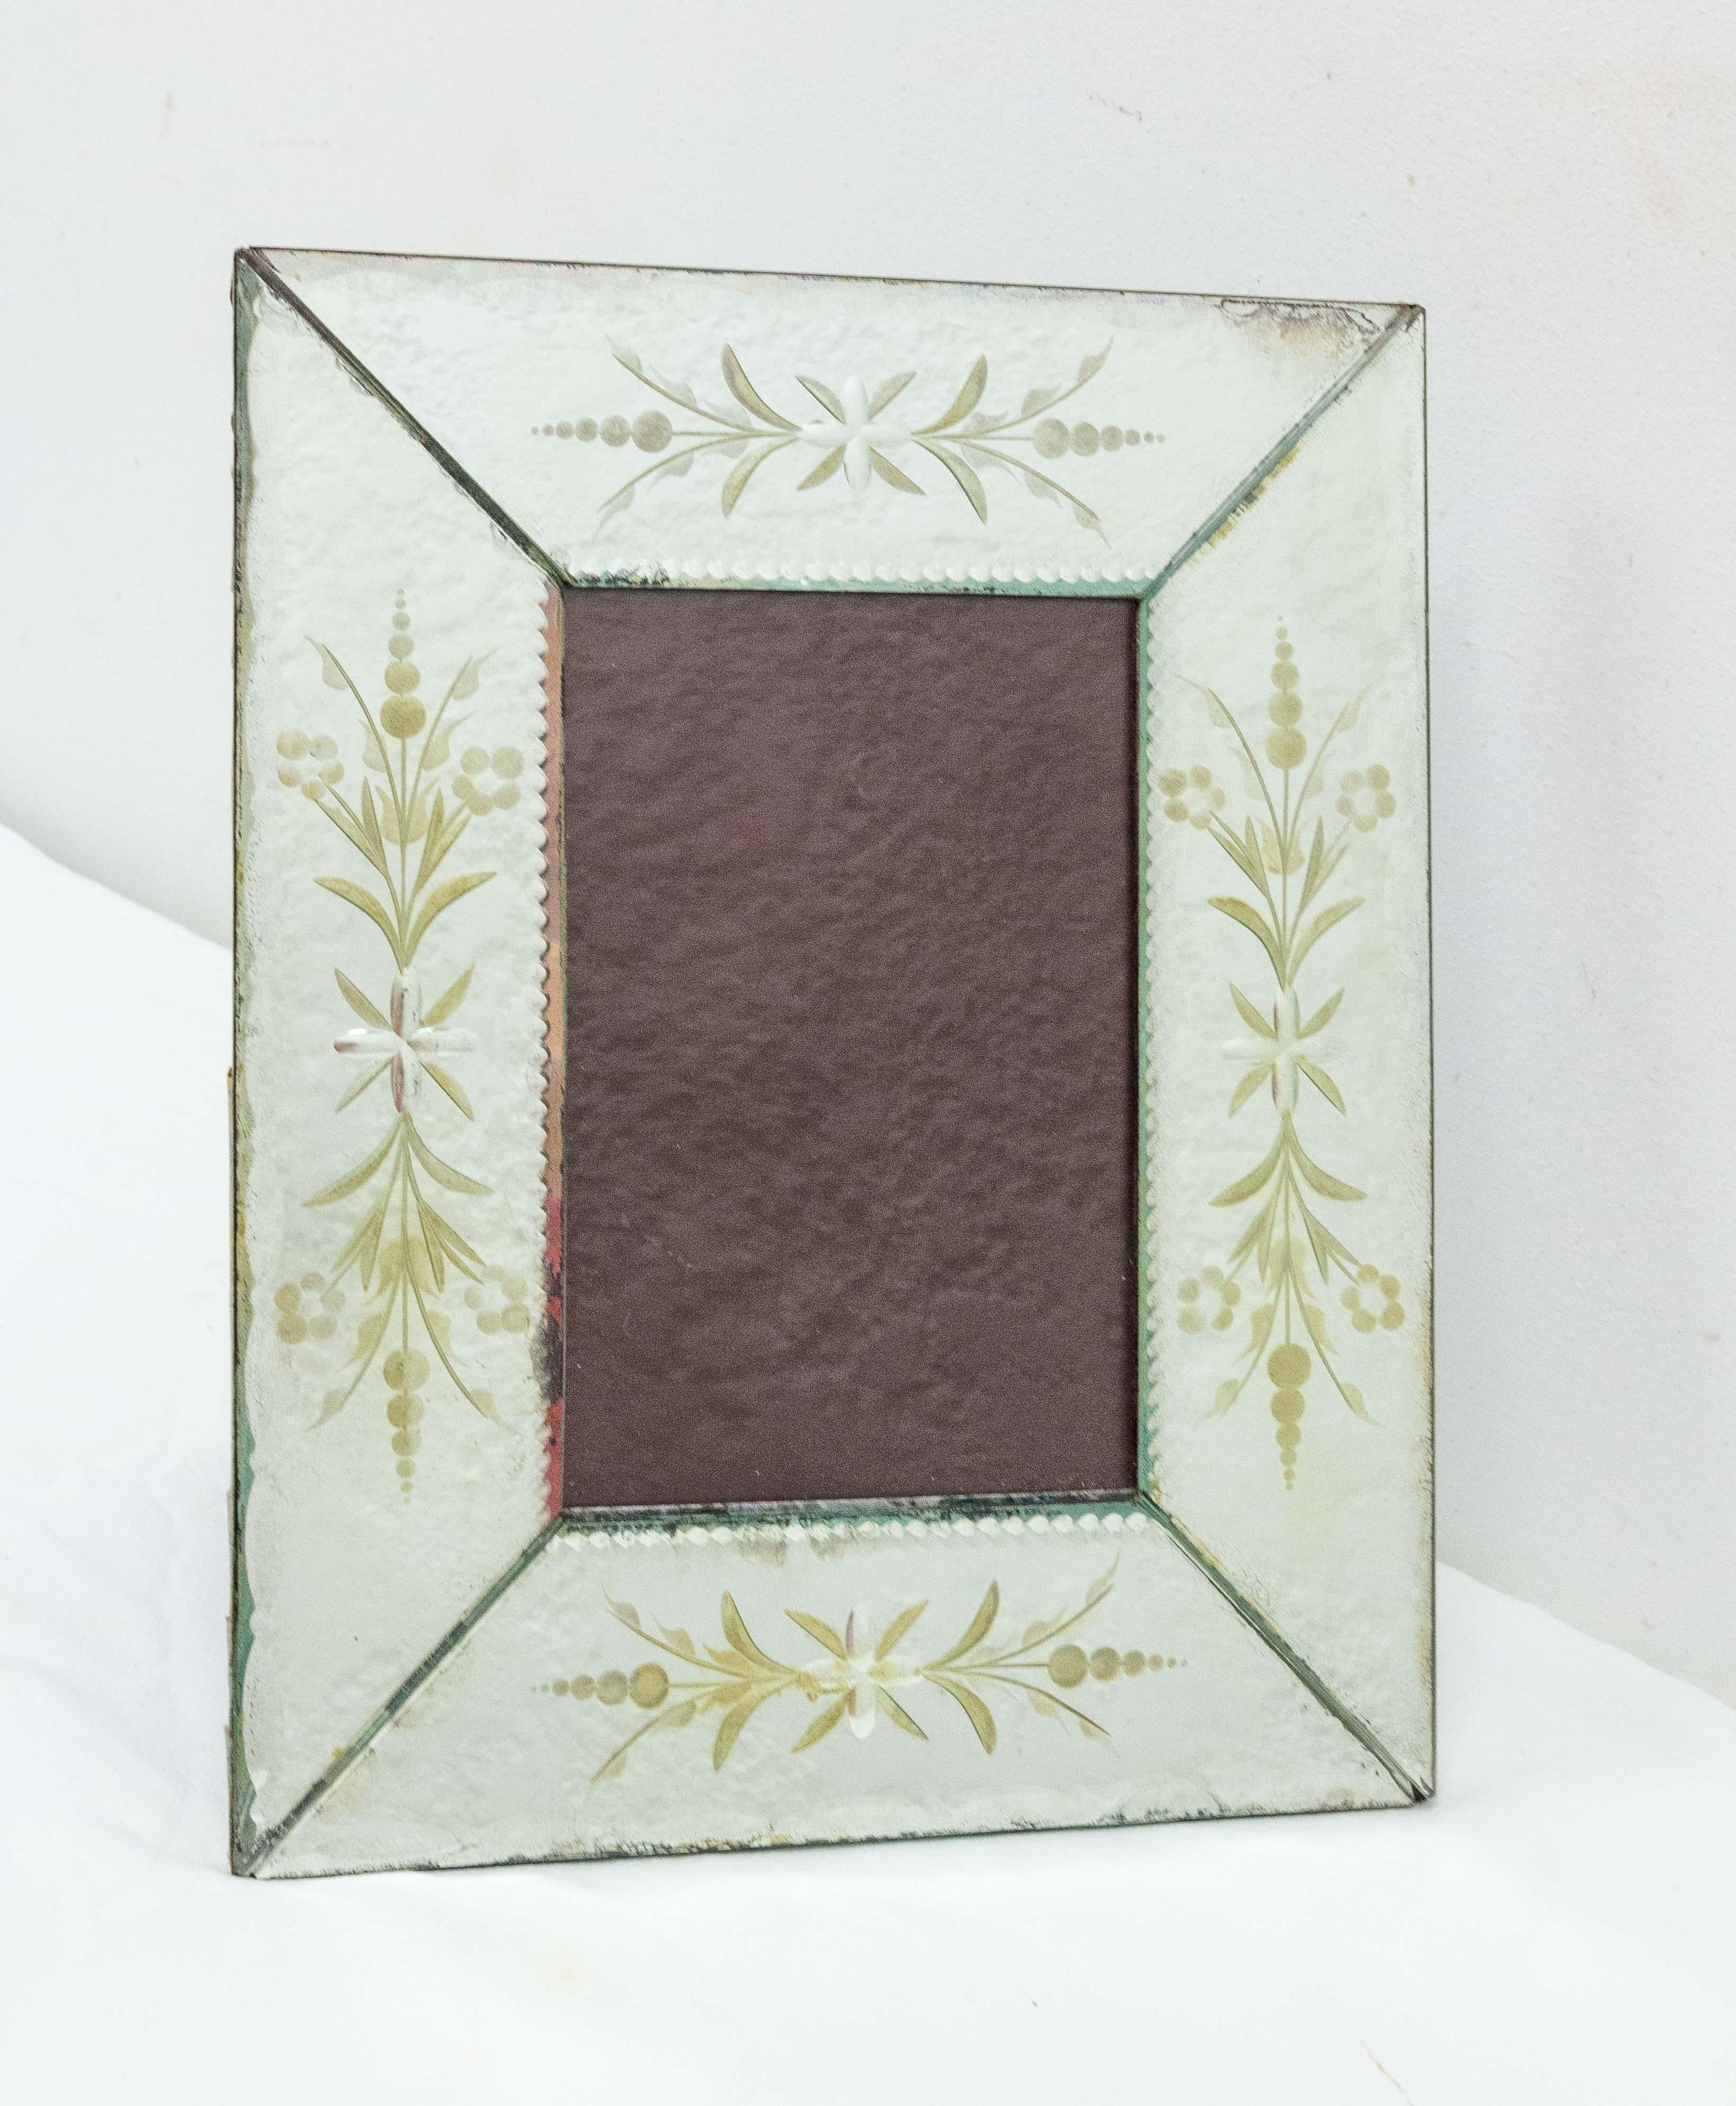 Picture frame in engraved mirror
French, circa 1930
Some signs of wear on the frame, that make the charm of this antique piece
Frame to be placed on a beautiful piece of furniture to highlight it.
Good antique condition.

Shipping:
P 2 L 24 H 30.